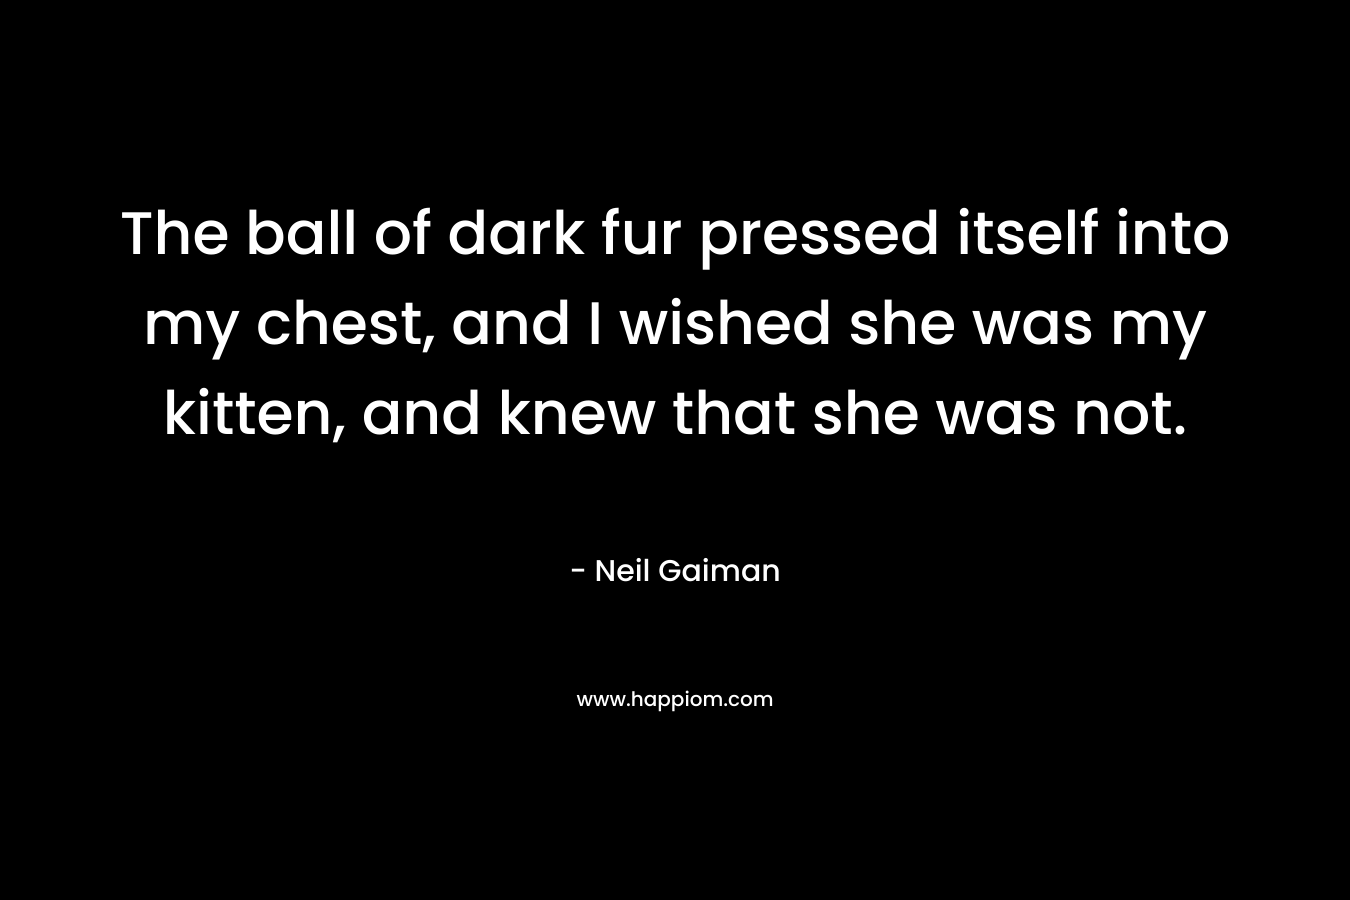 The ball of dark fur pressed itself into my chest, and I wished she was my kitten, and knew that she was not. – Neil Gaiman